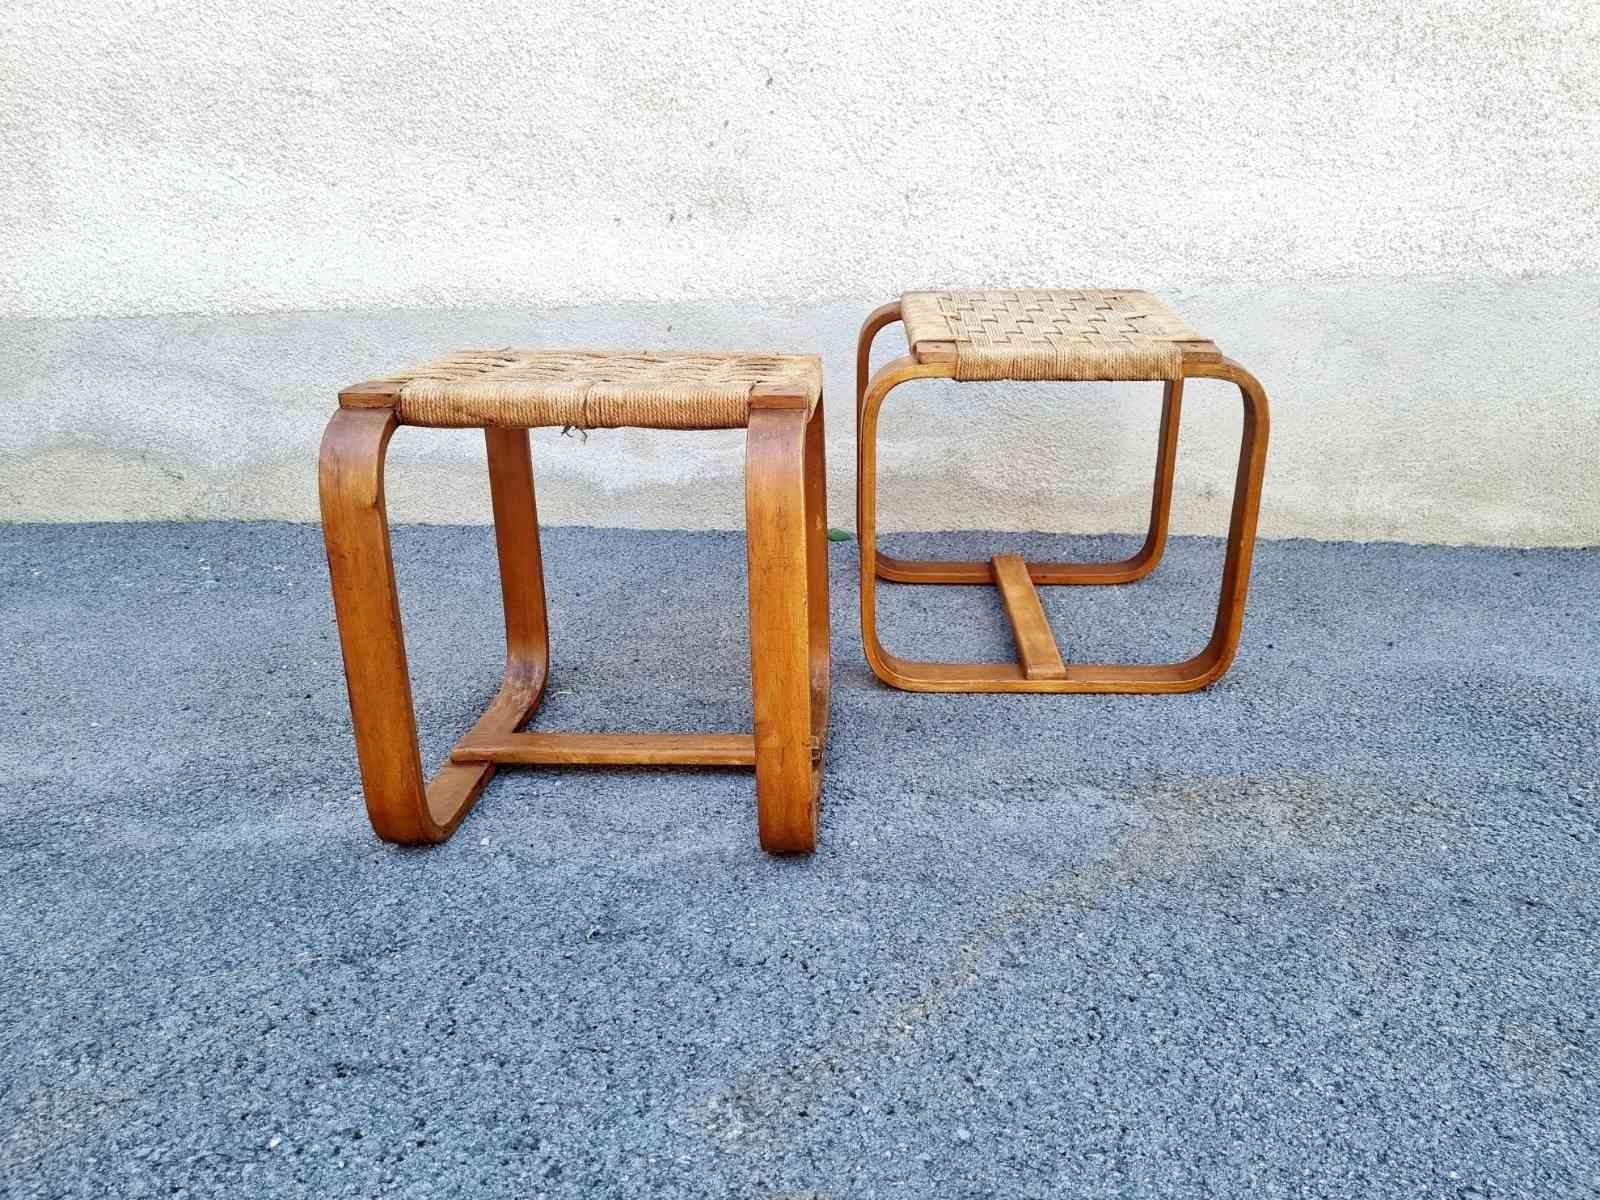 Italian Rare Pair of Stools by Giuseppe Pagano Pogatschnig for Gino Maggioni, Italy 40s For Sale